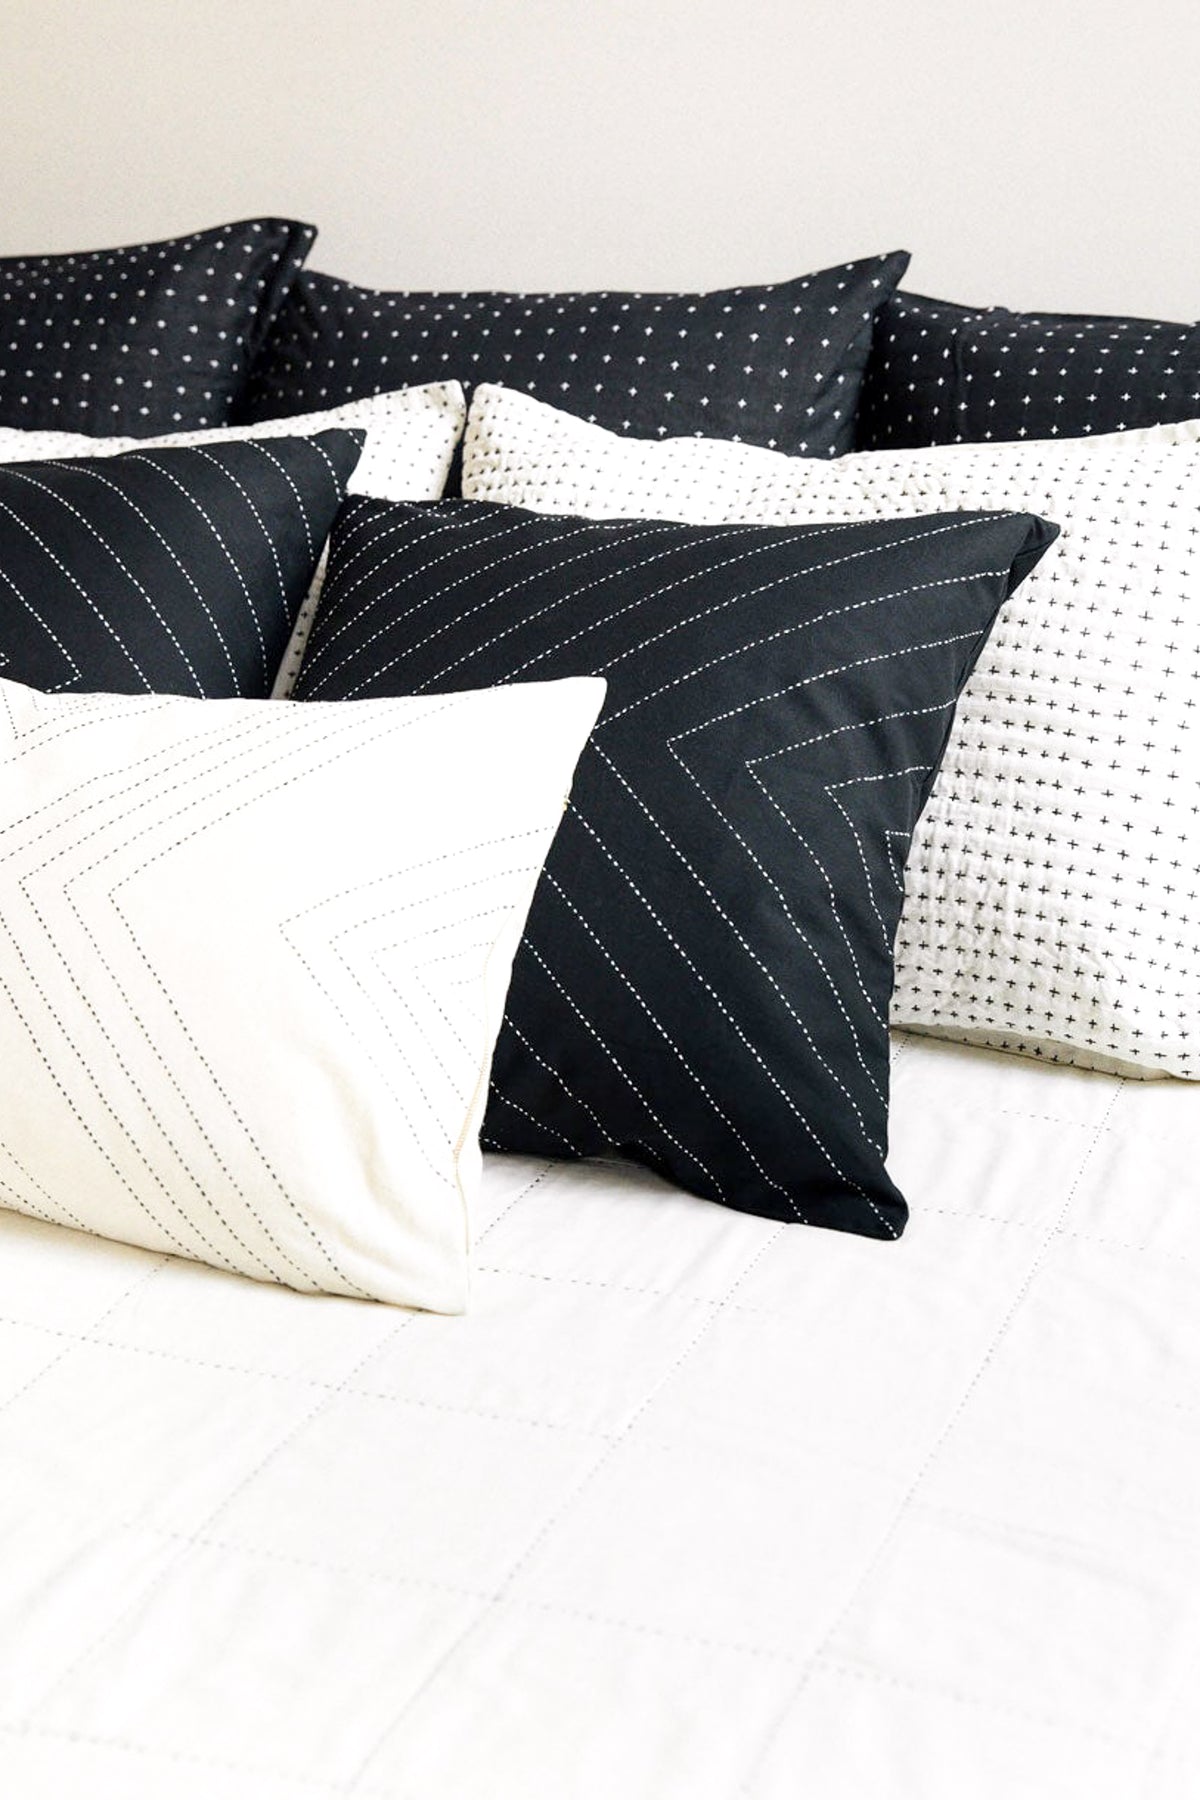 Anchal Project Arrow-Stitch Throw Pillow Cover